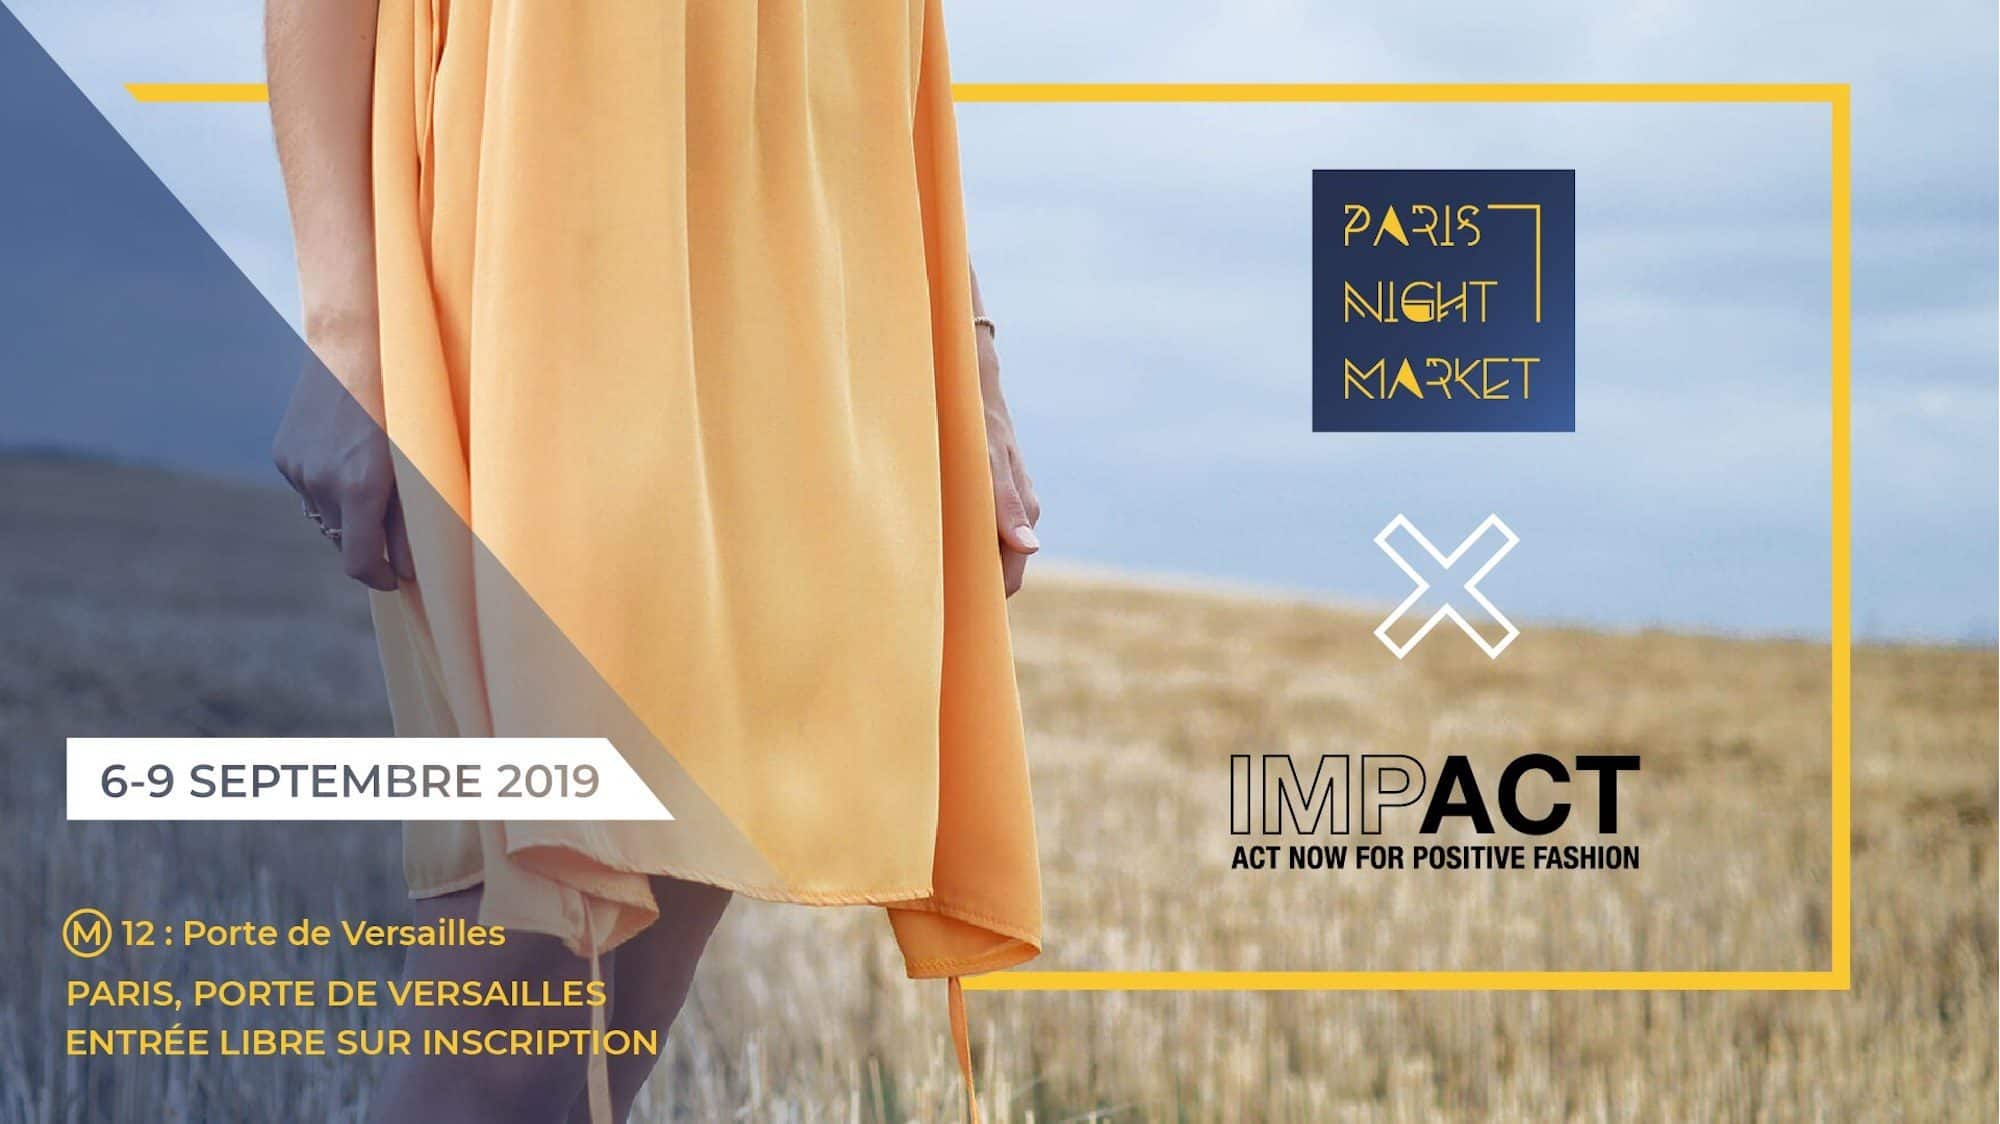 A poster for the event Paris Night Market x Impact at Porte de Versailles of a woman wearing an orange skirt in a field.